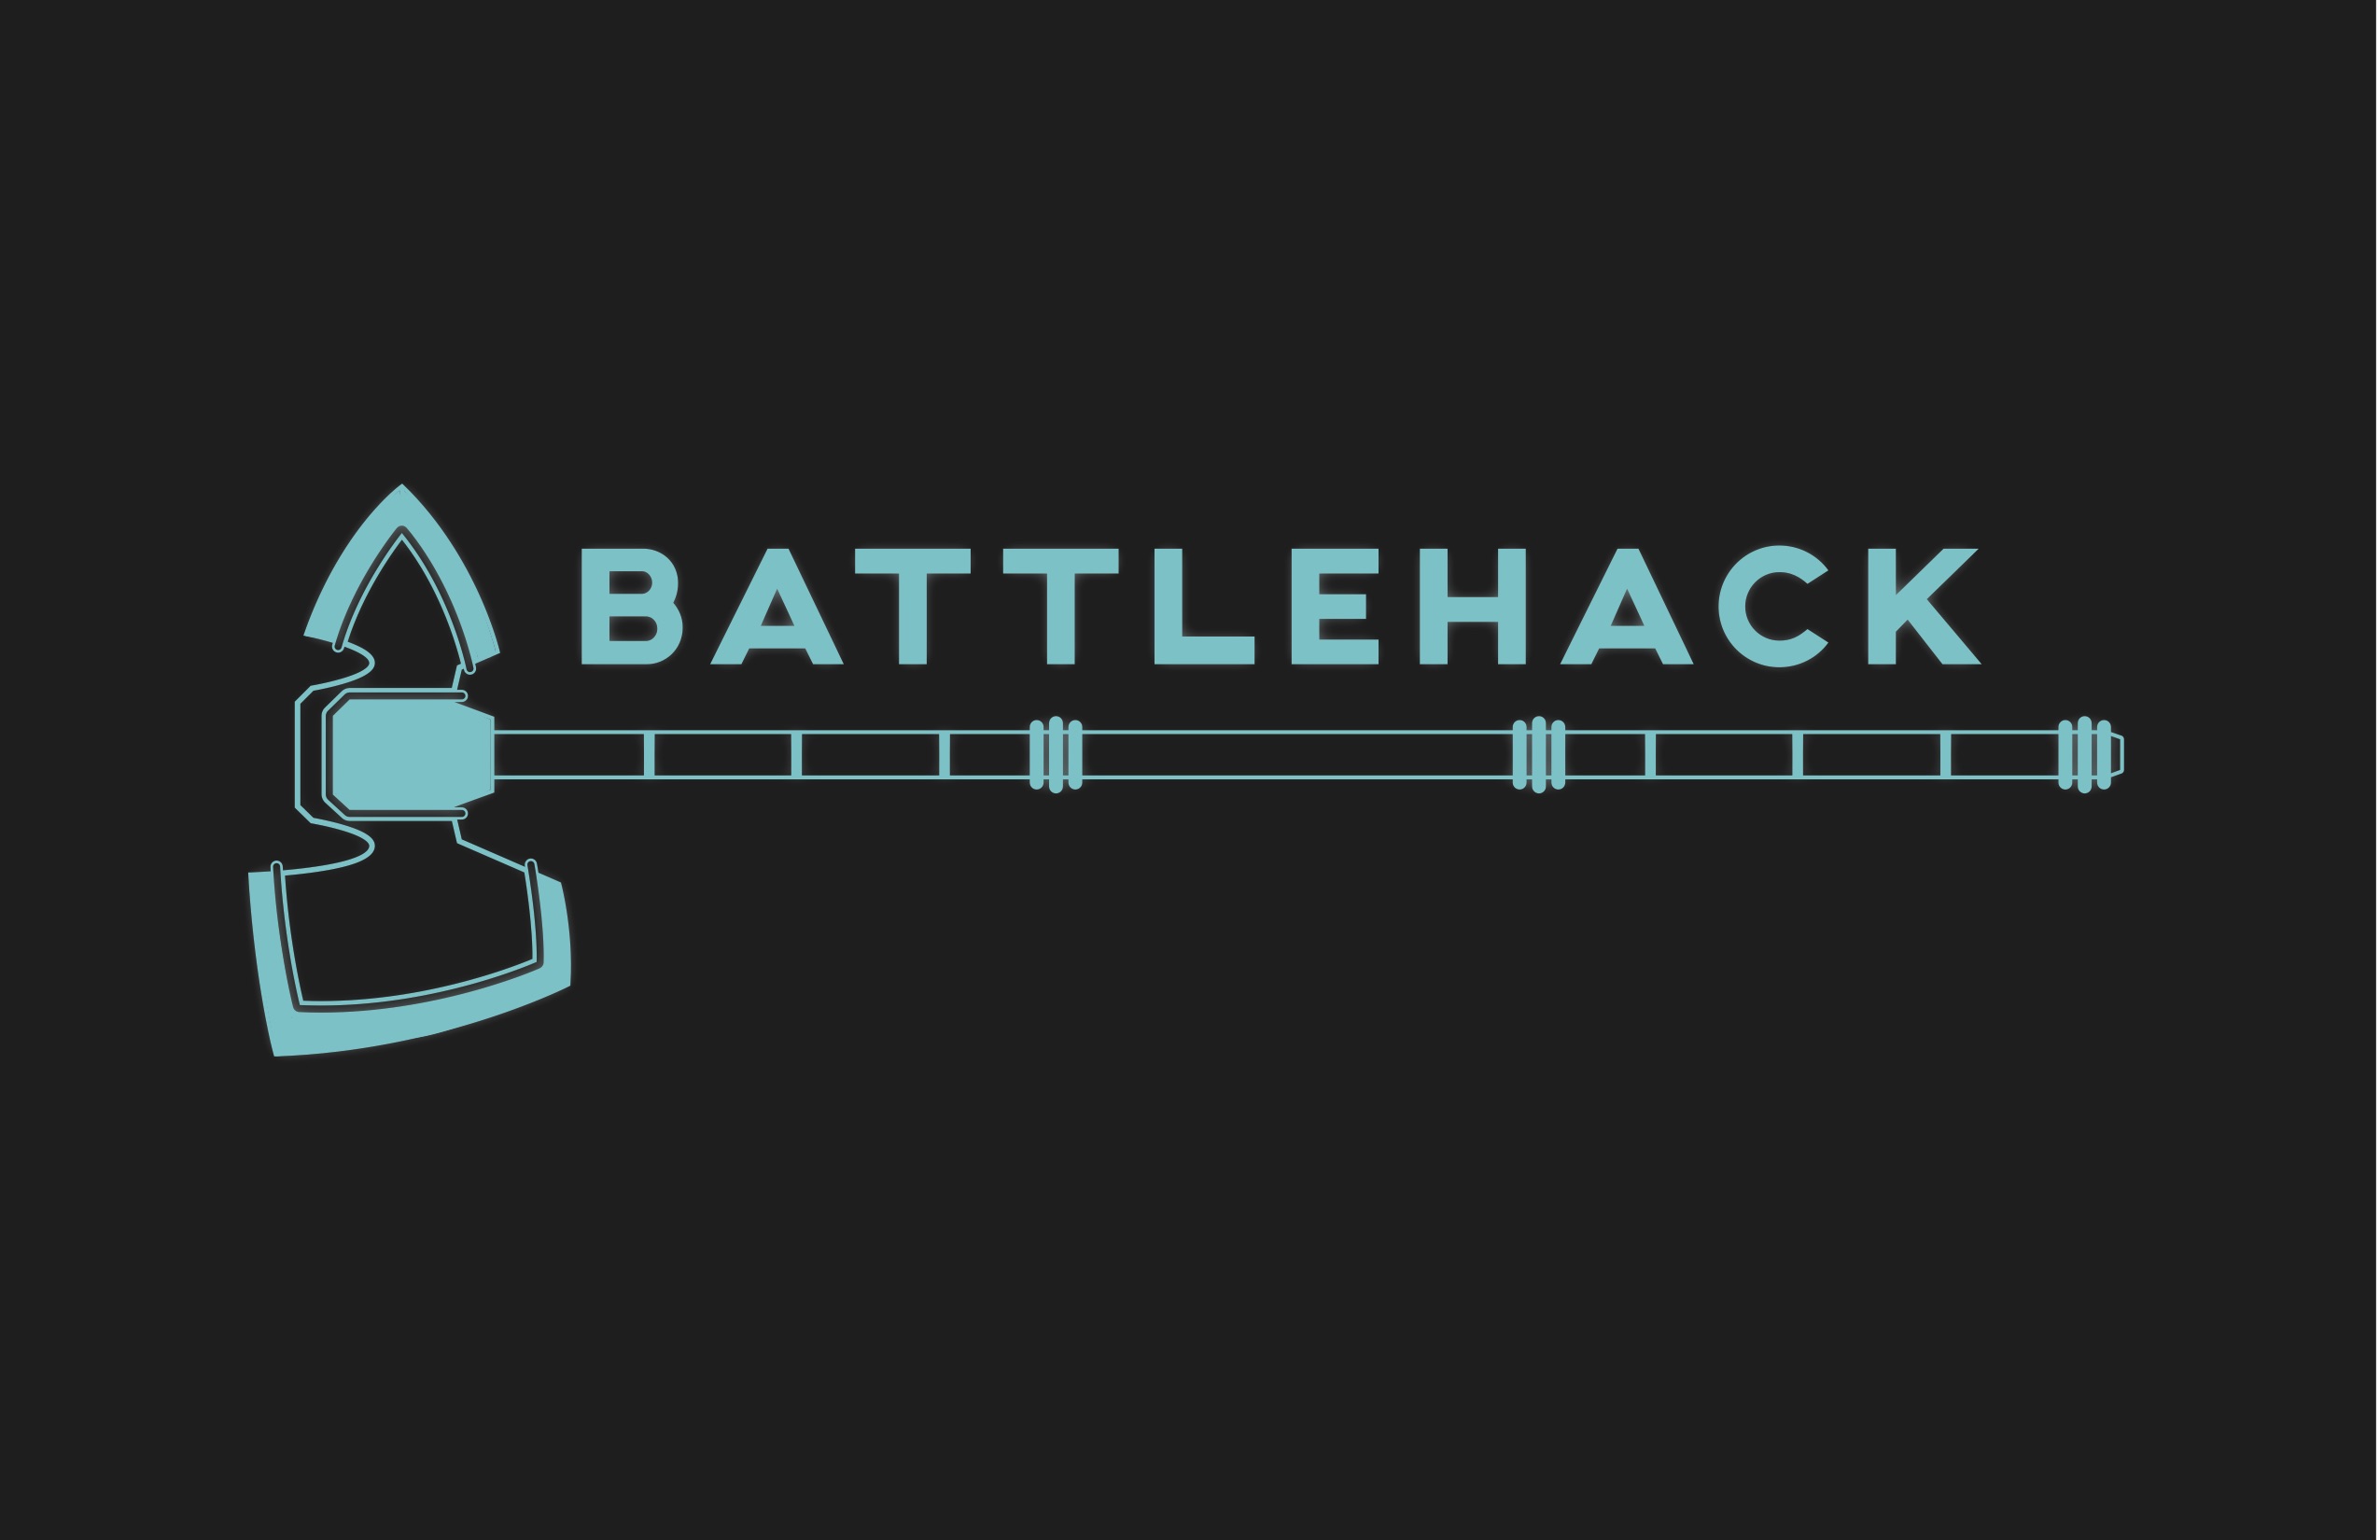 BattleHack is coming to Italy. Are you the ultimate hacker for good?